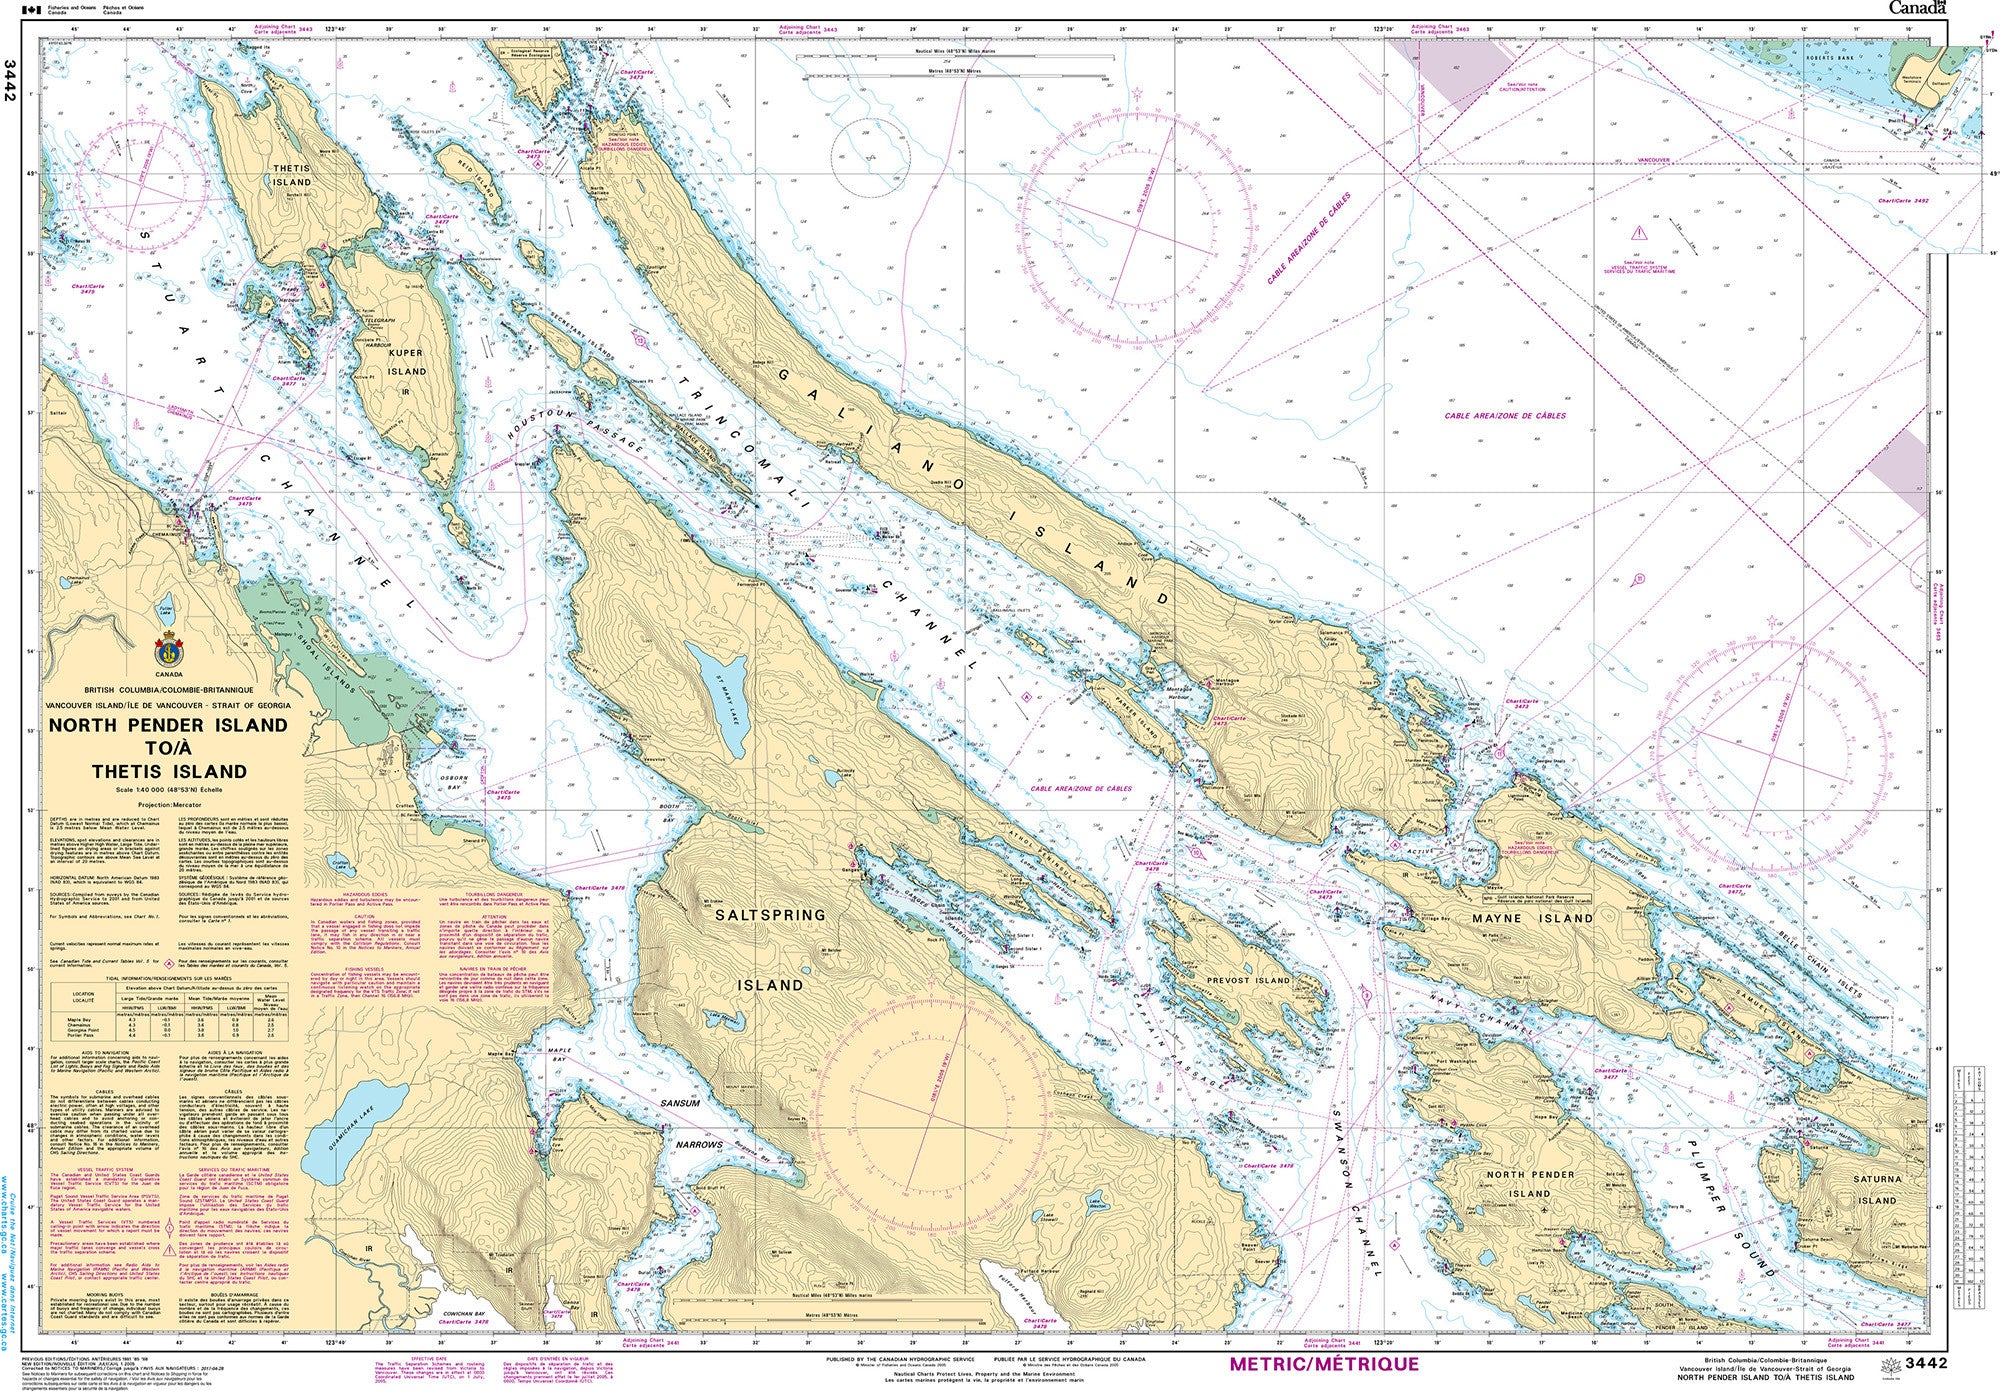 Canadian Hydrographic Service Nautical Chart CHS3442: North Pender Island to/à Thetis Island